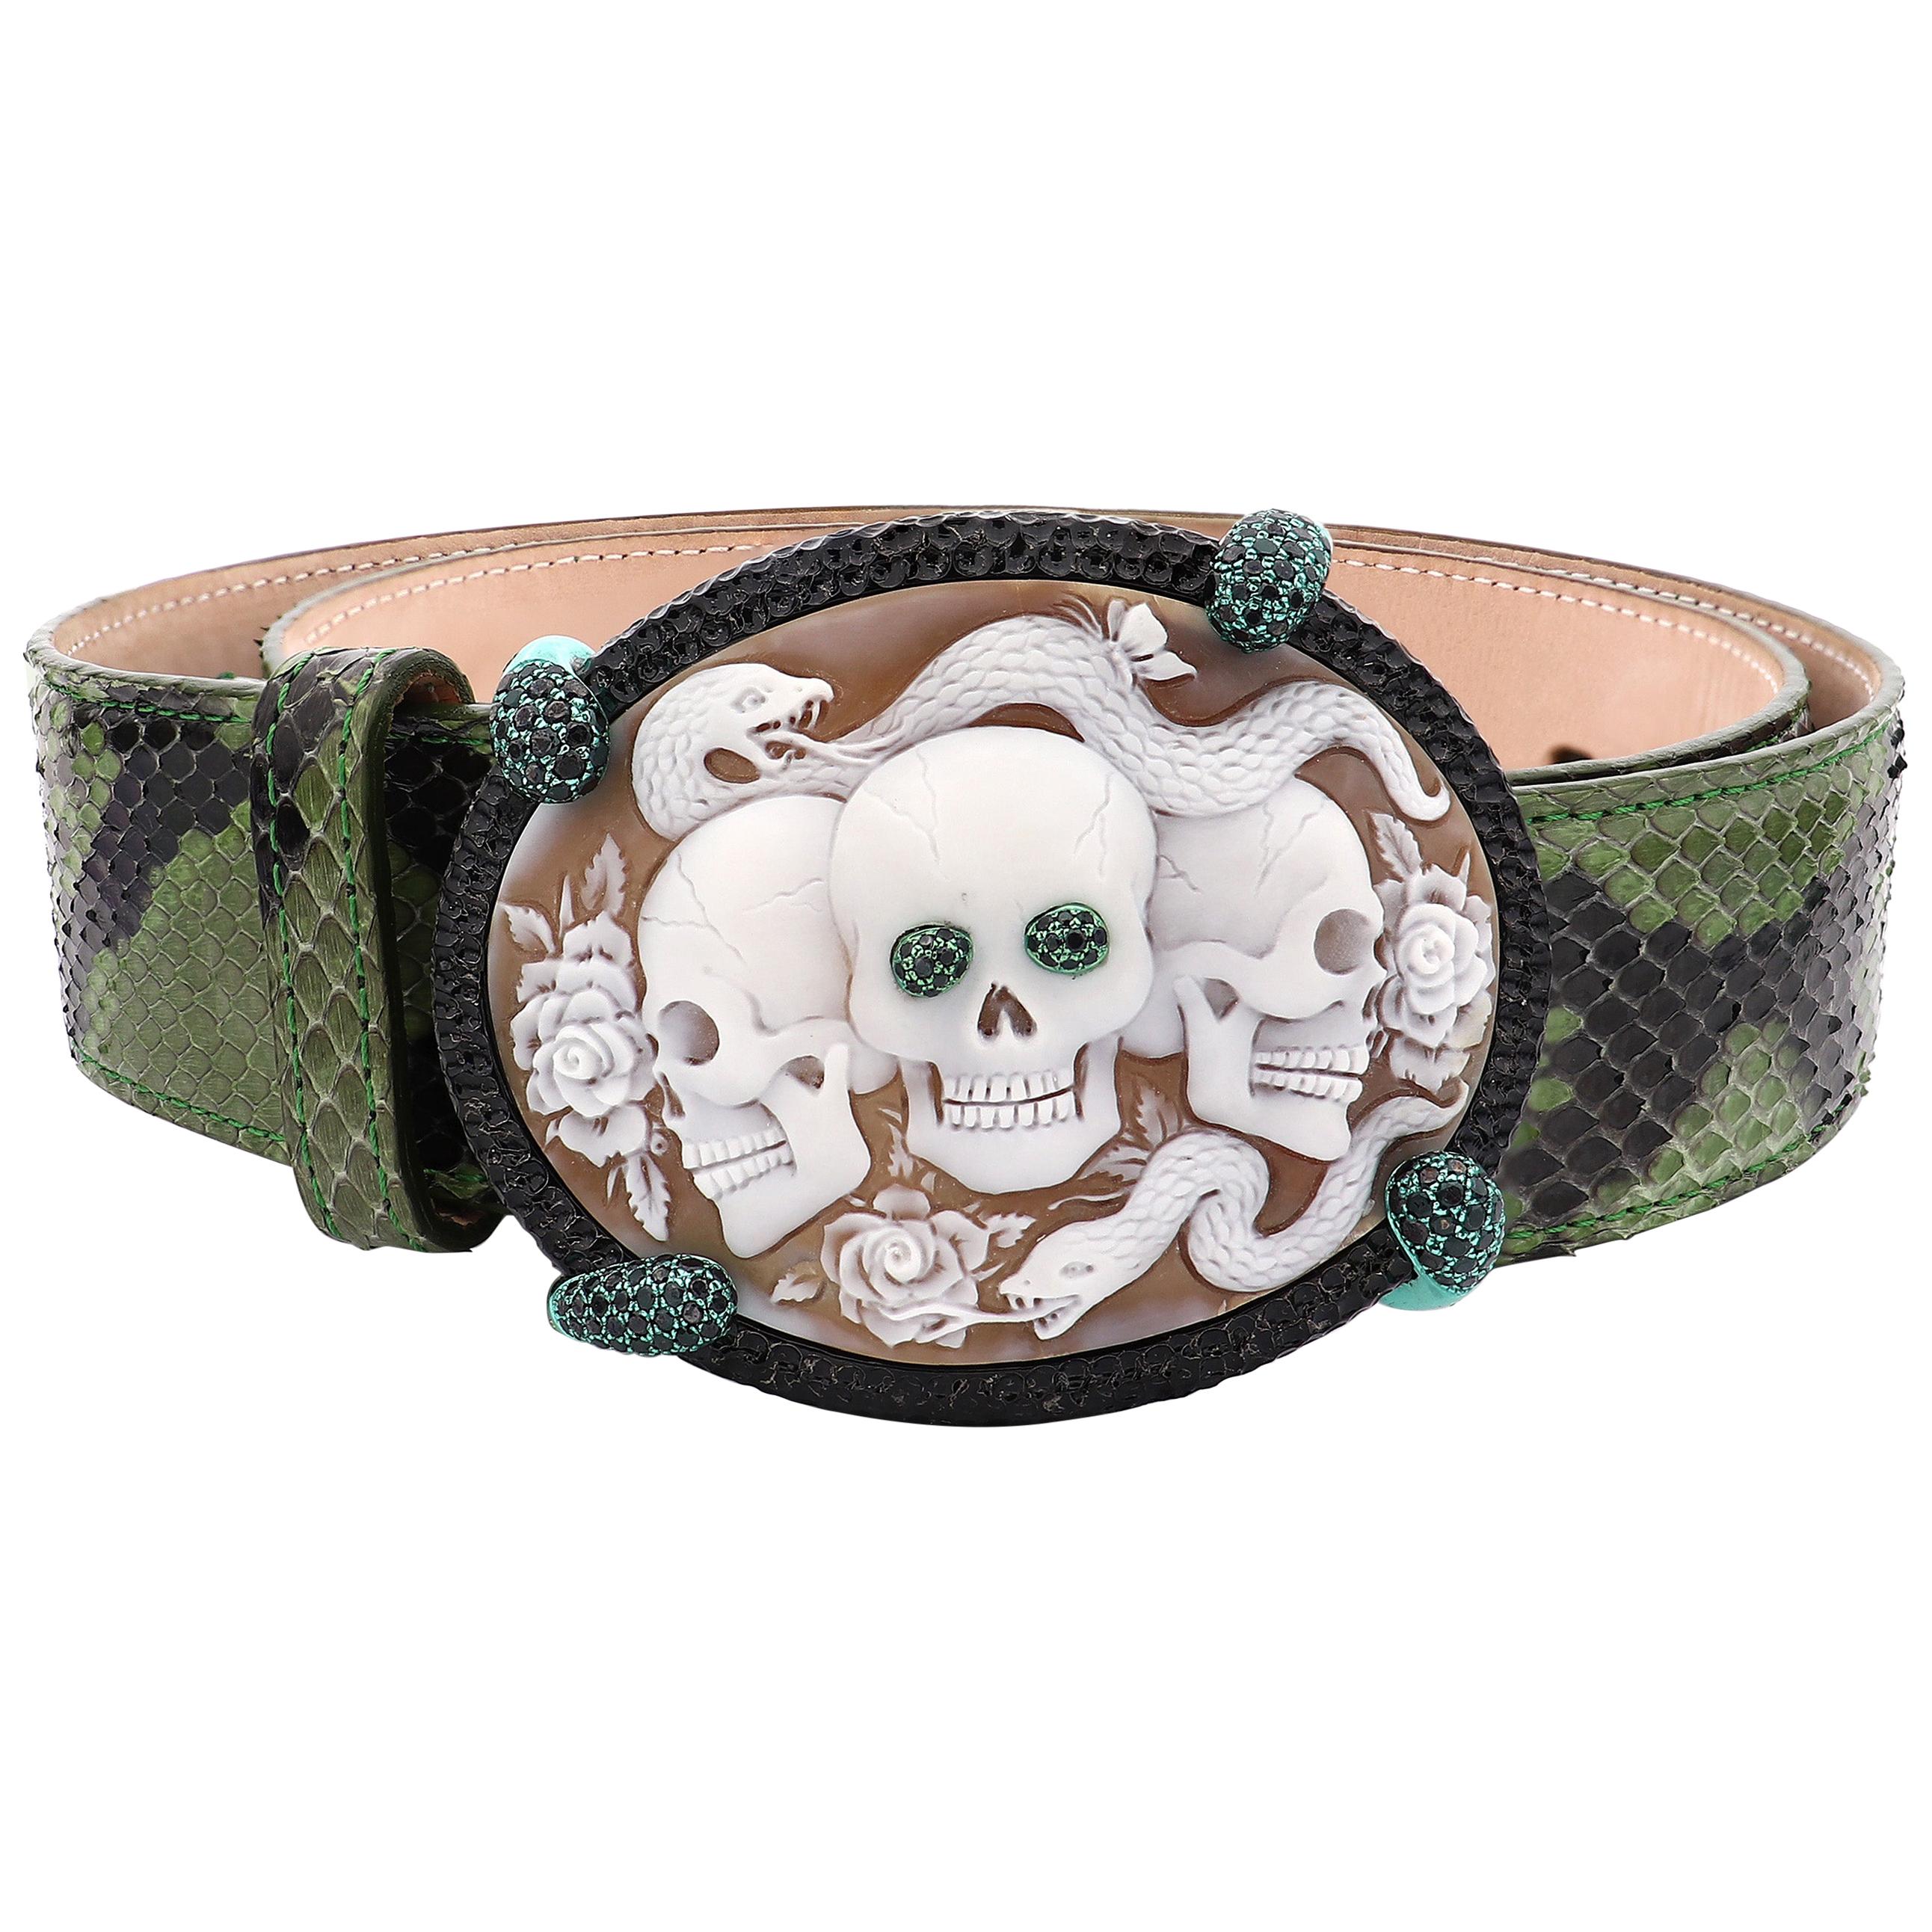 Amedeo "Memento Mori" Cameo Buckle Belt with Python Leather For Sale